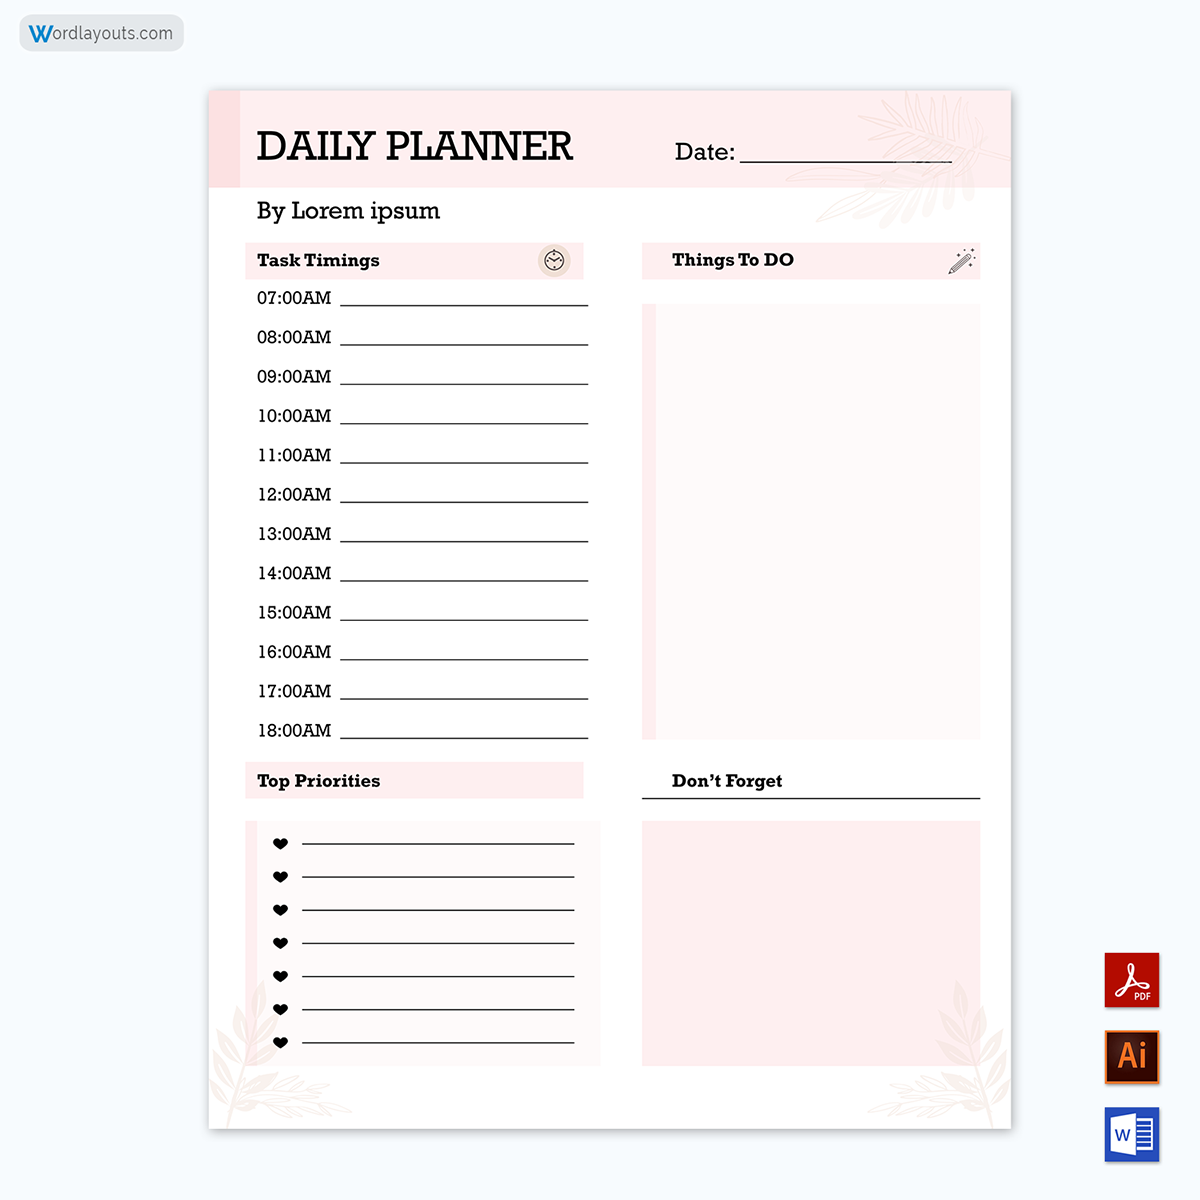 Daily Planner Template-8669ndnjp-06-23-p02